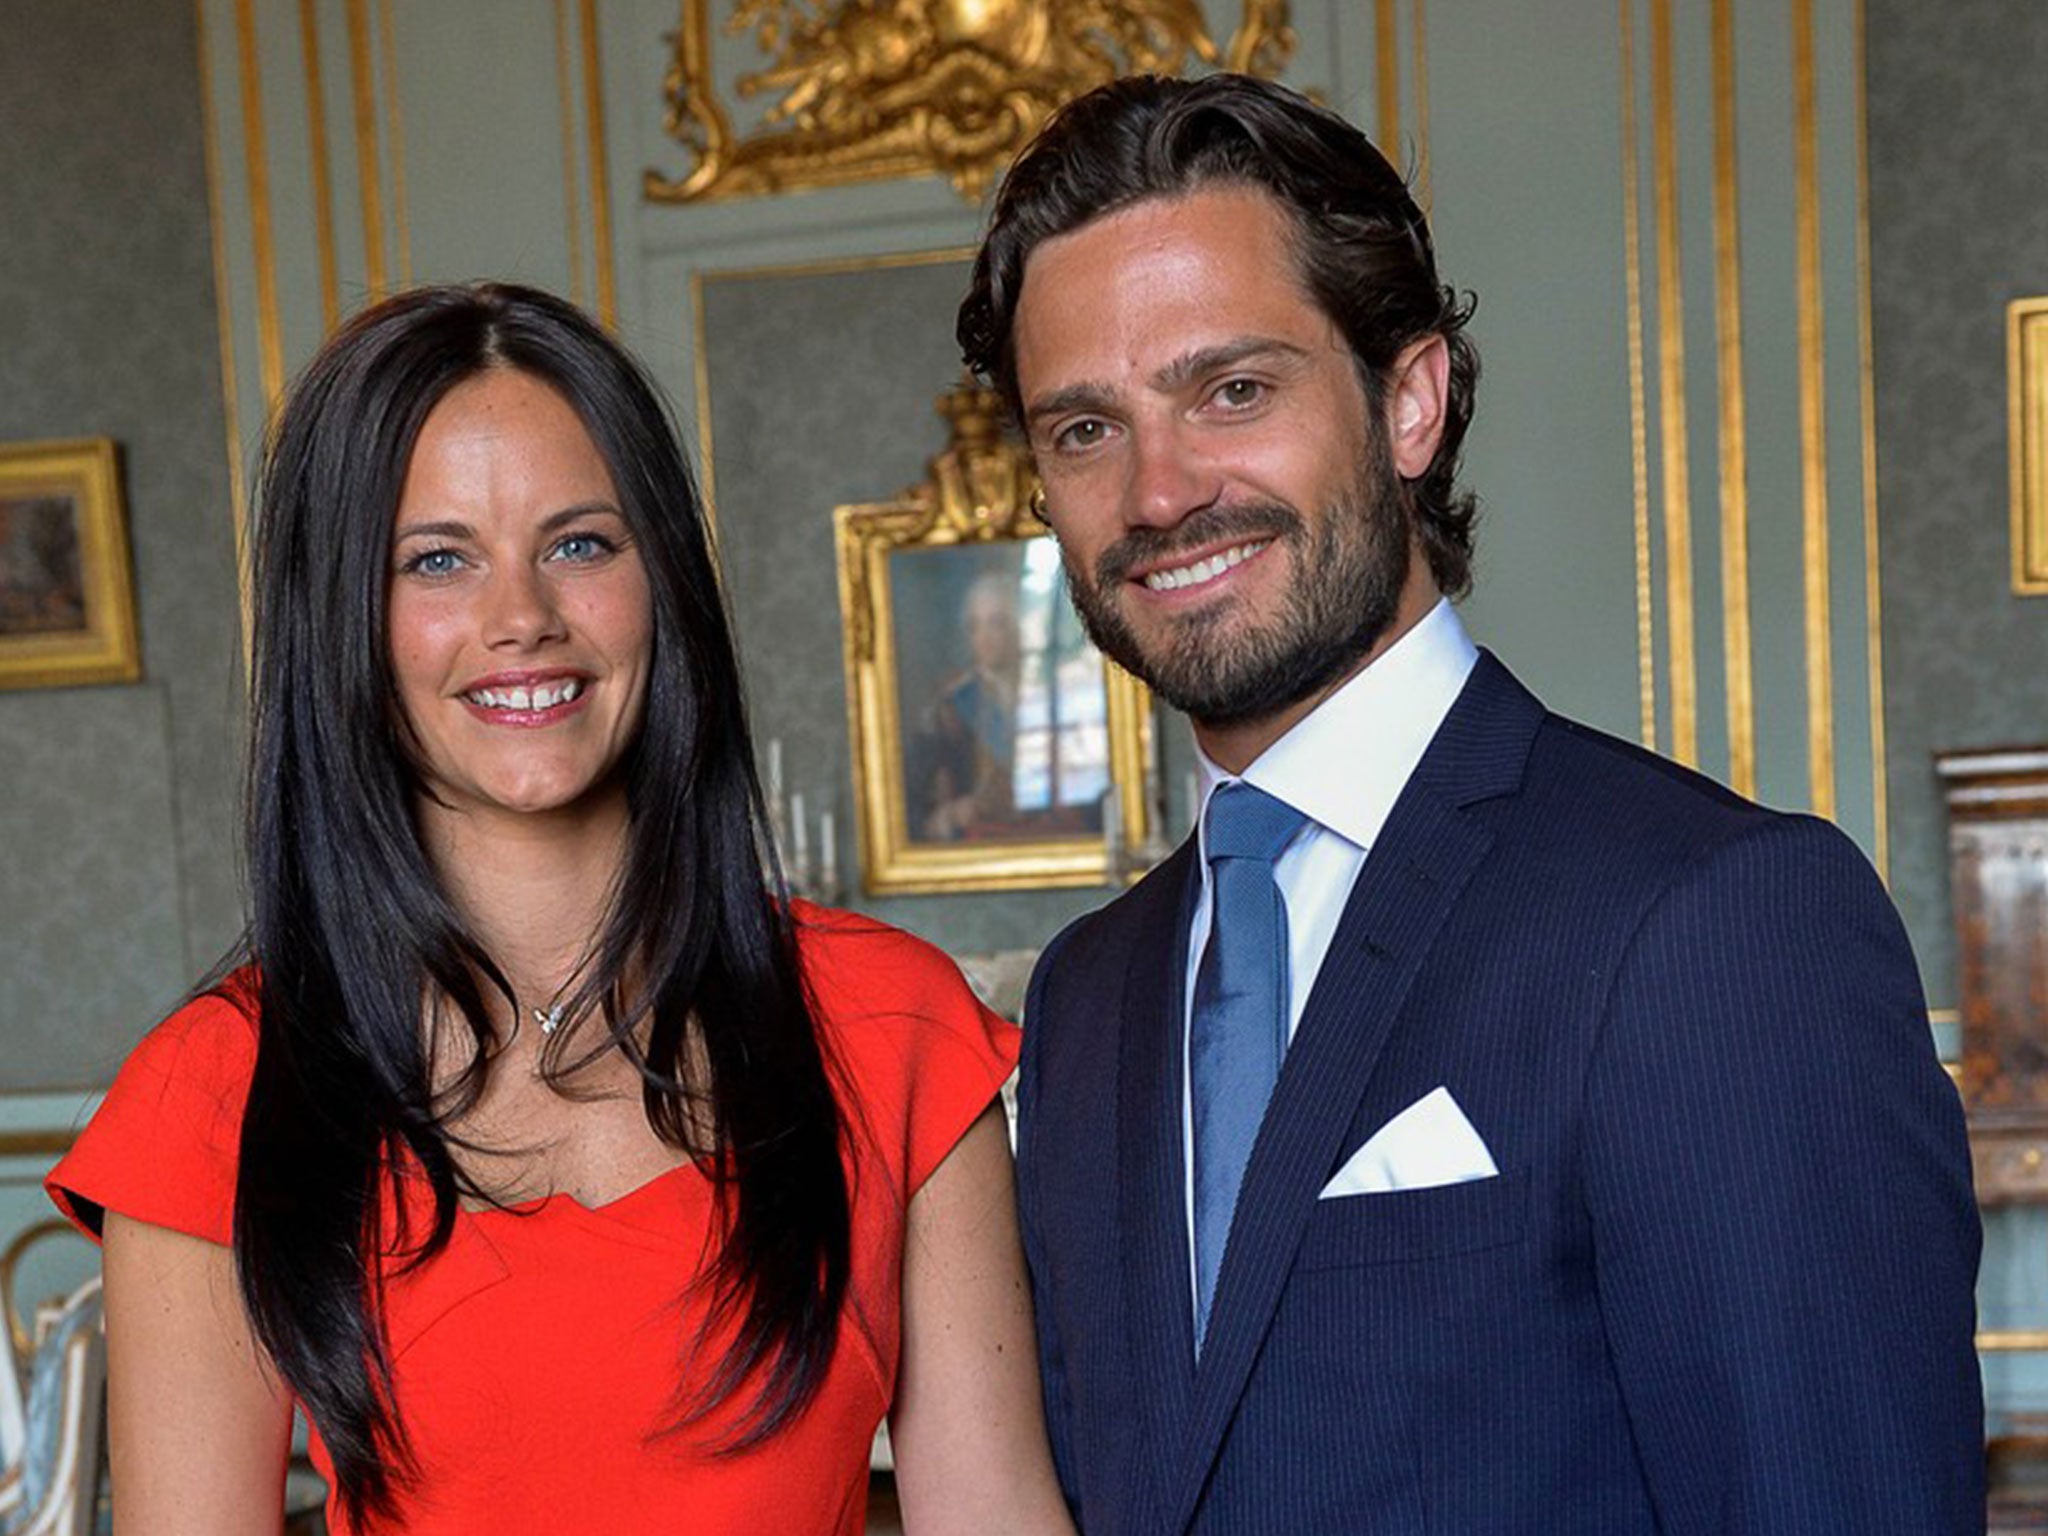 Carl Porn Star - Prince Carl Philip of Sweden engaged to reality TV star and former model  Sofia Hellqvist | The Independent | The Independent